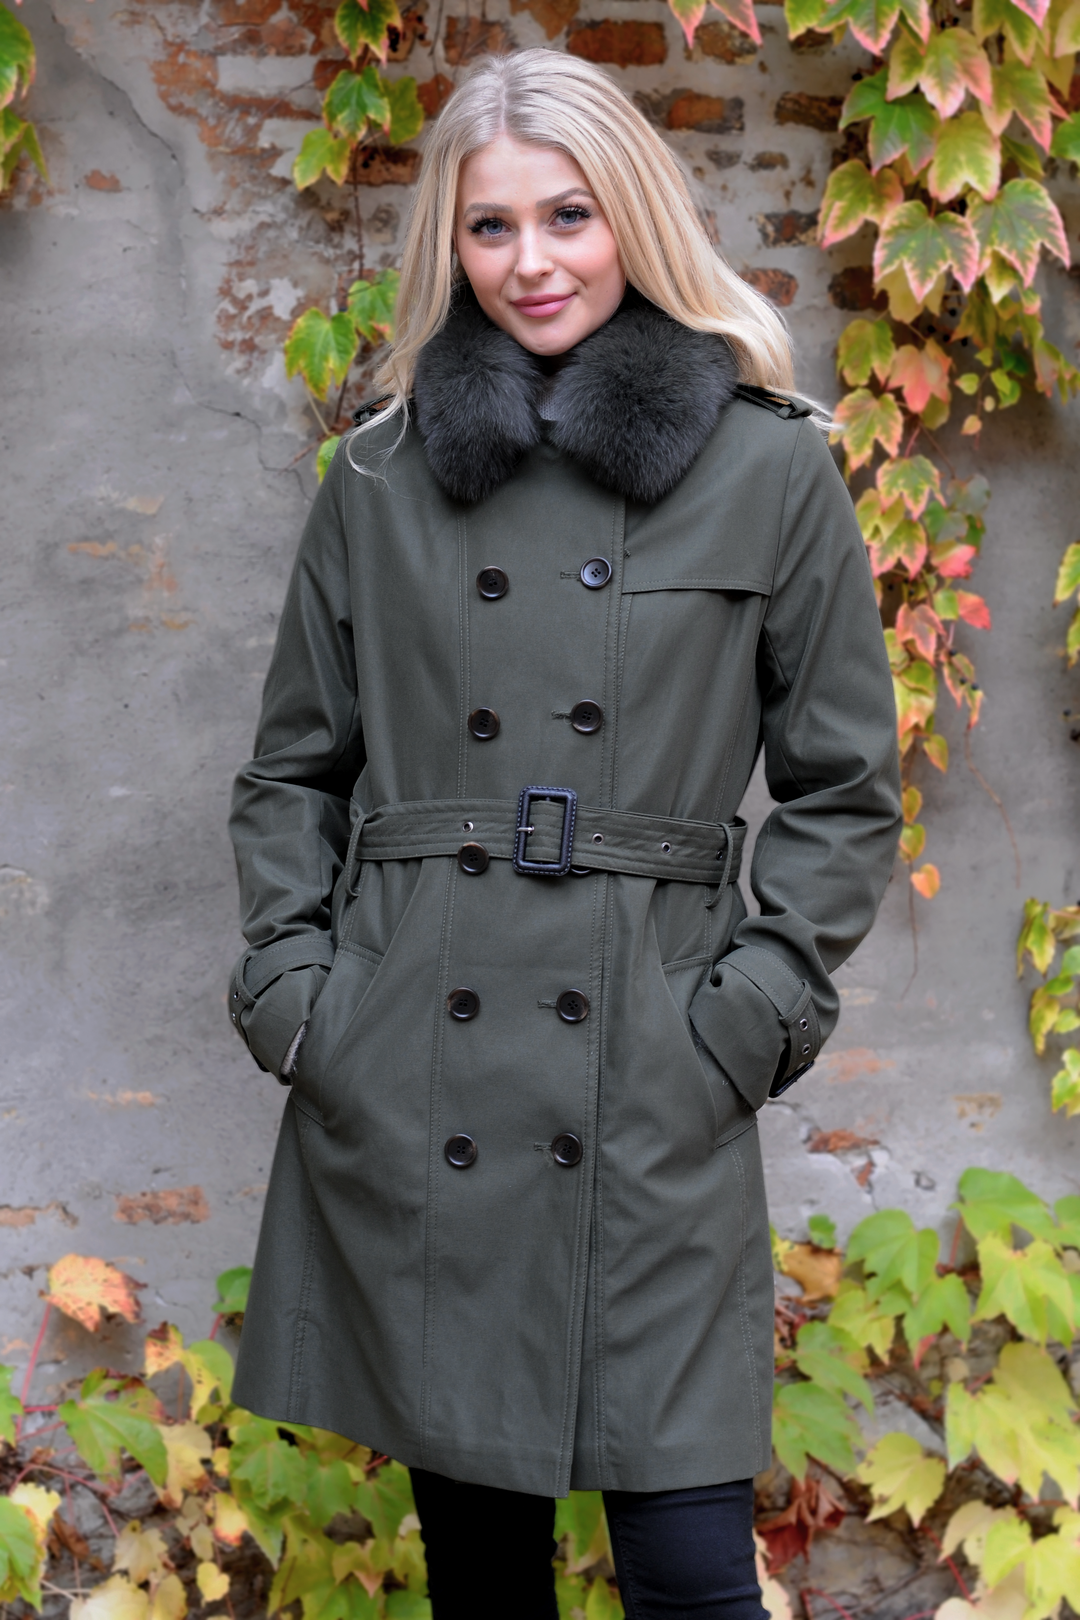 Daisy - Army - Trenchcoat with Fur collar - Women